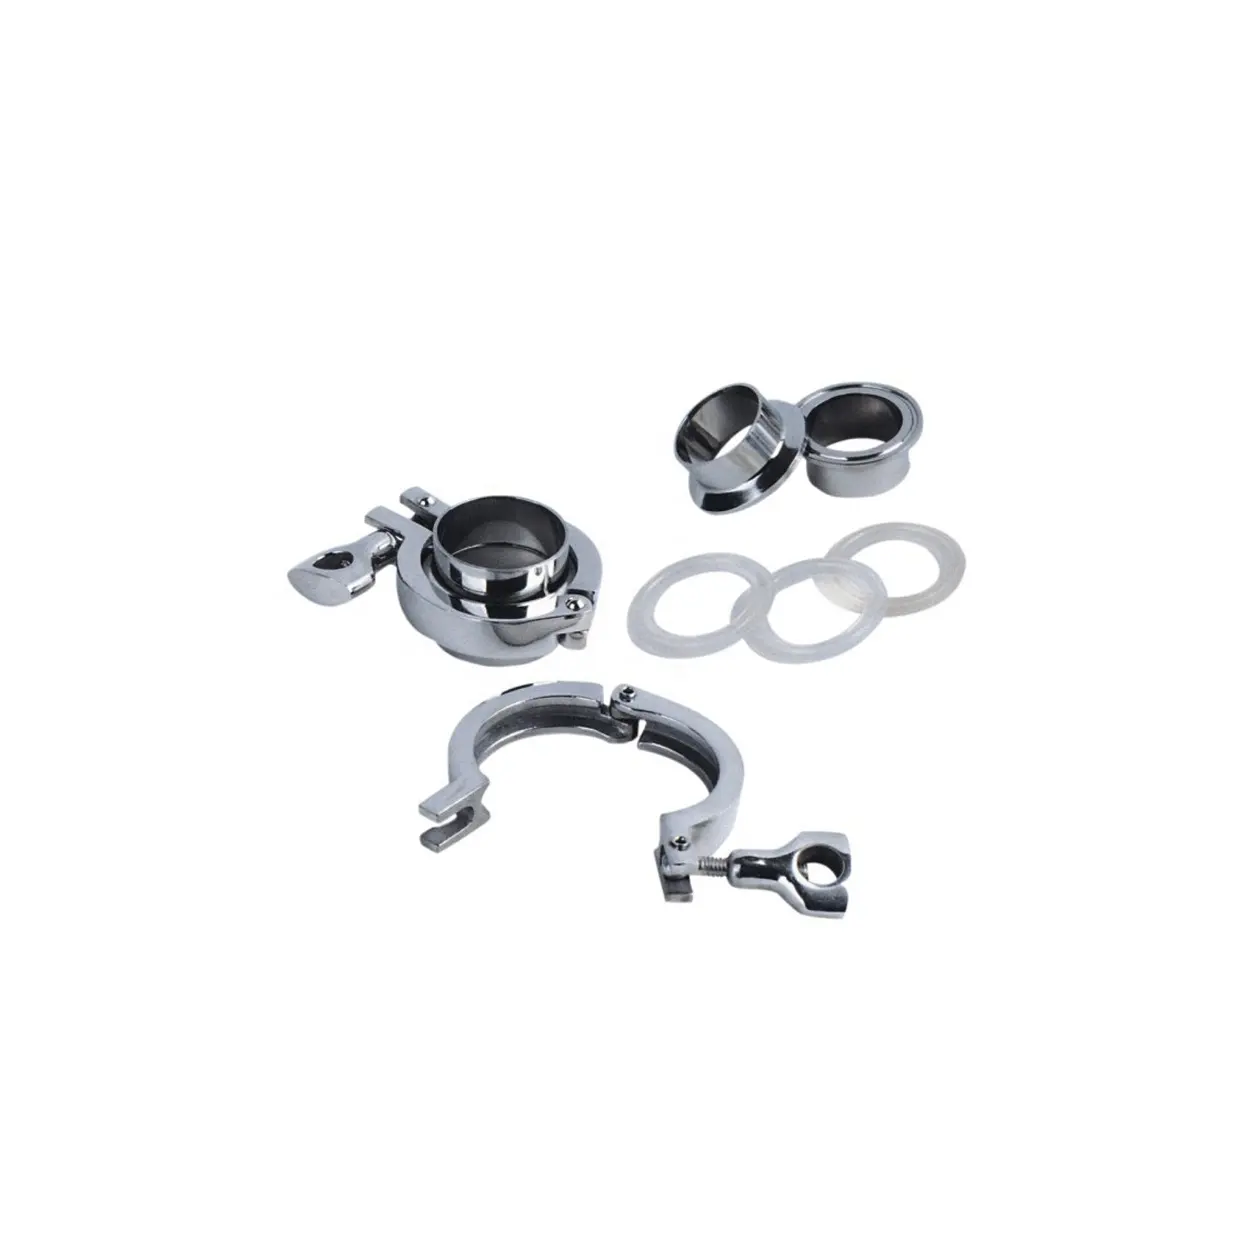 ISO 2852 Sanitary Stainless Steel Tri Clamp Fittings   Clamp Pipe Couplings For Food Industry